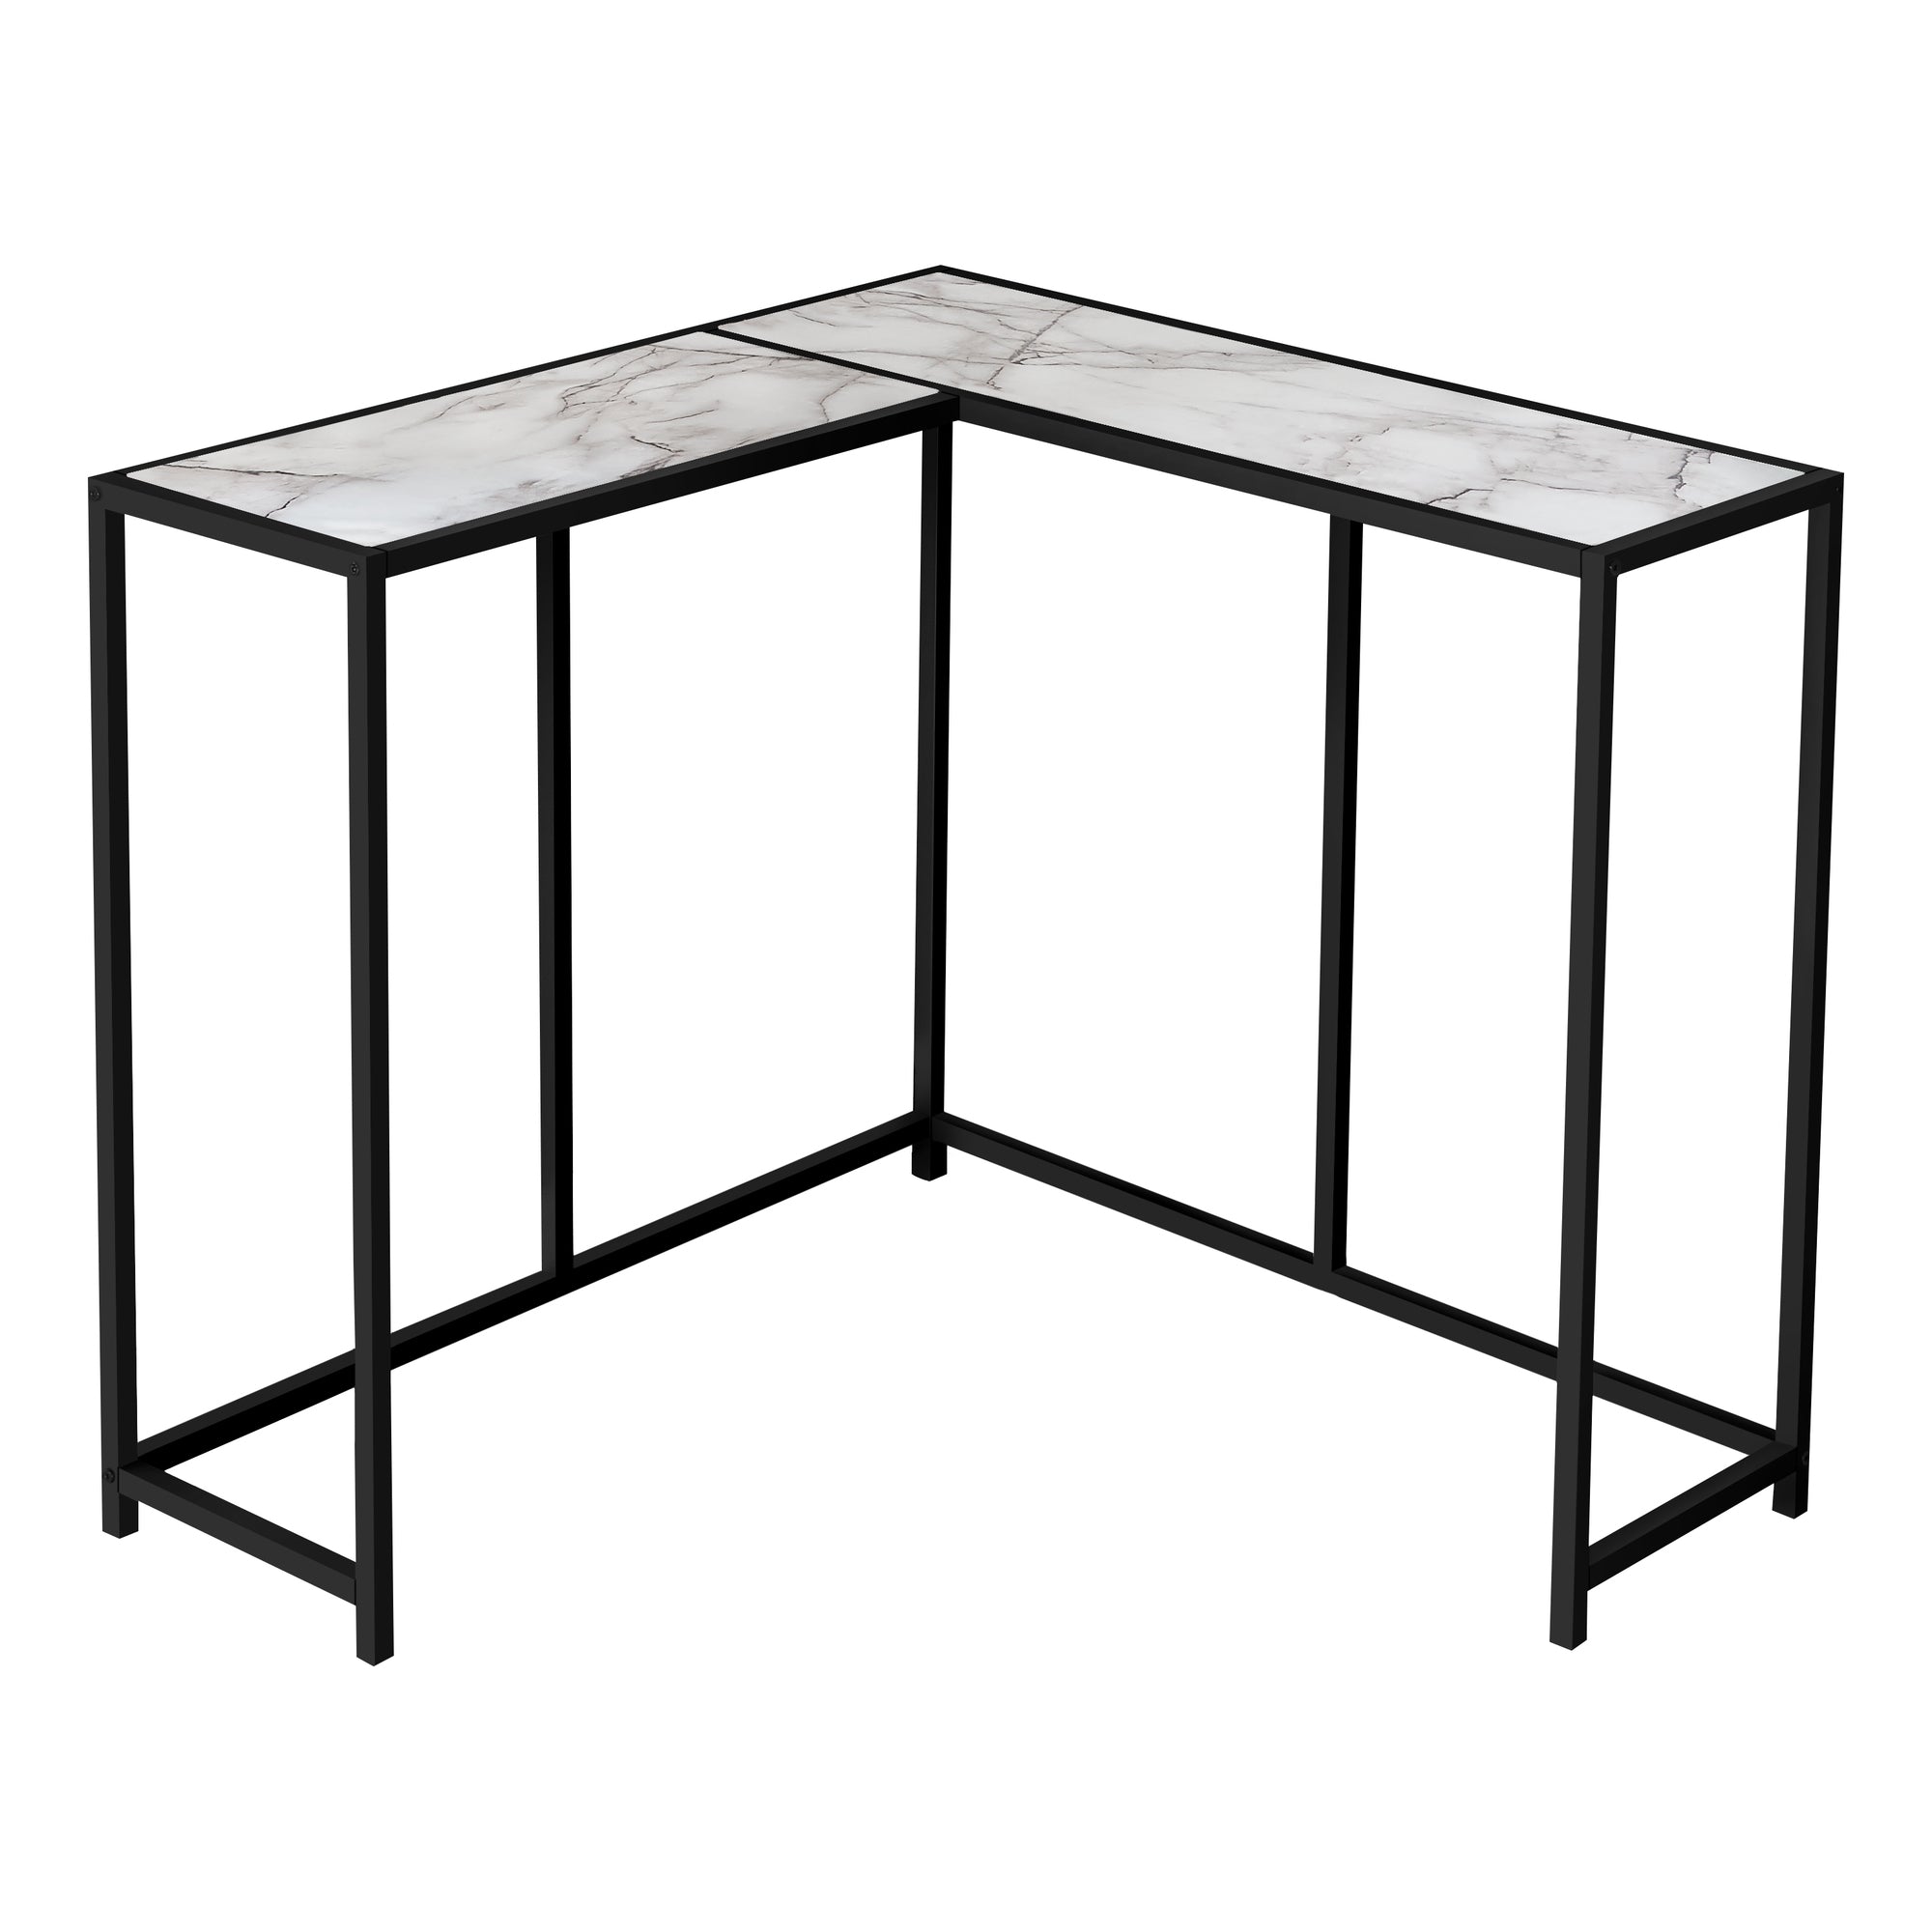 MN-322159    Accent Table, Console, Entryway, Narrow, Corner, Living Room, Bedroom, Metal Frame, Laminate, White Marble Look, Black, Contemporary, Modern